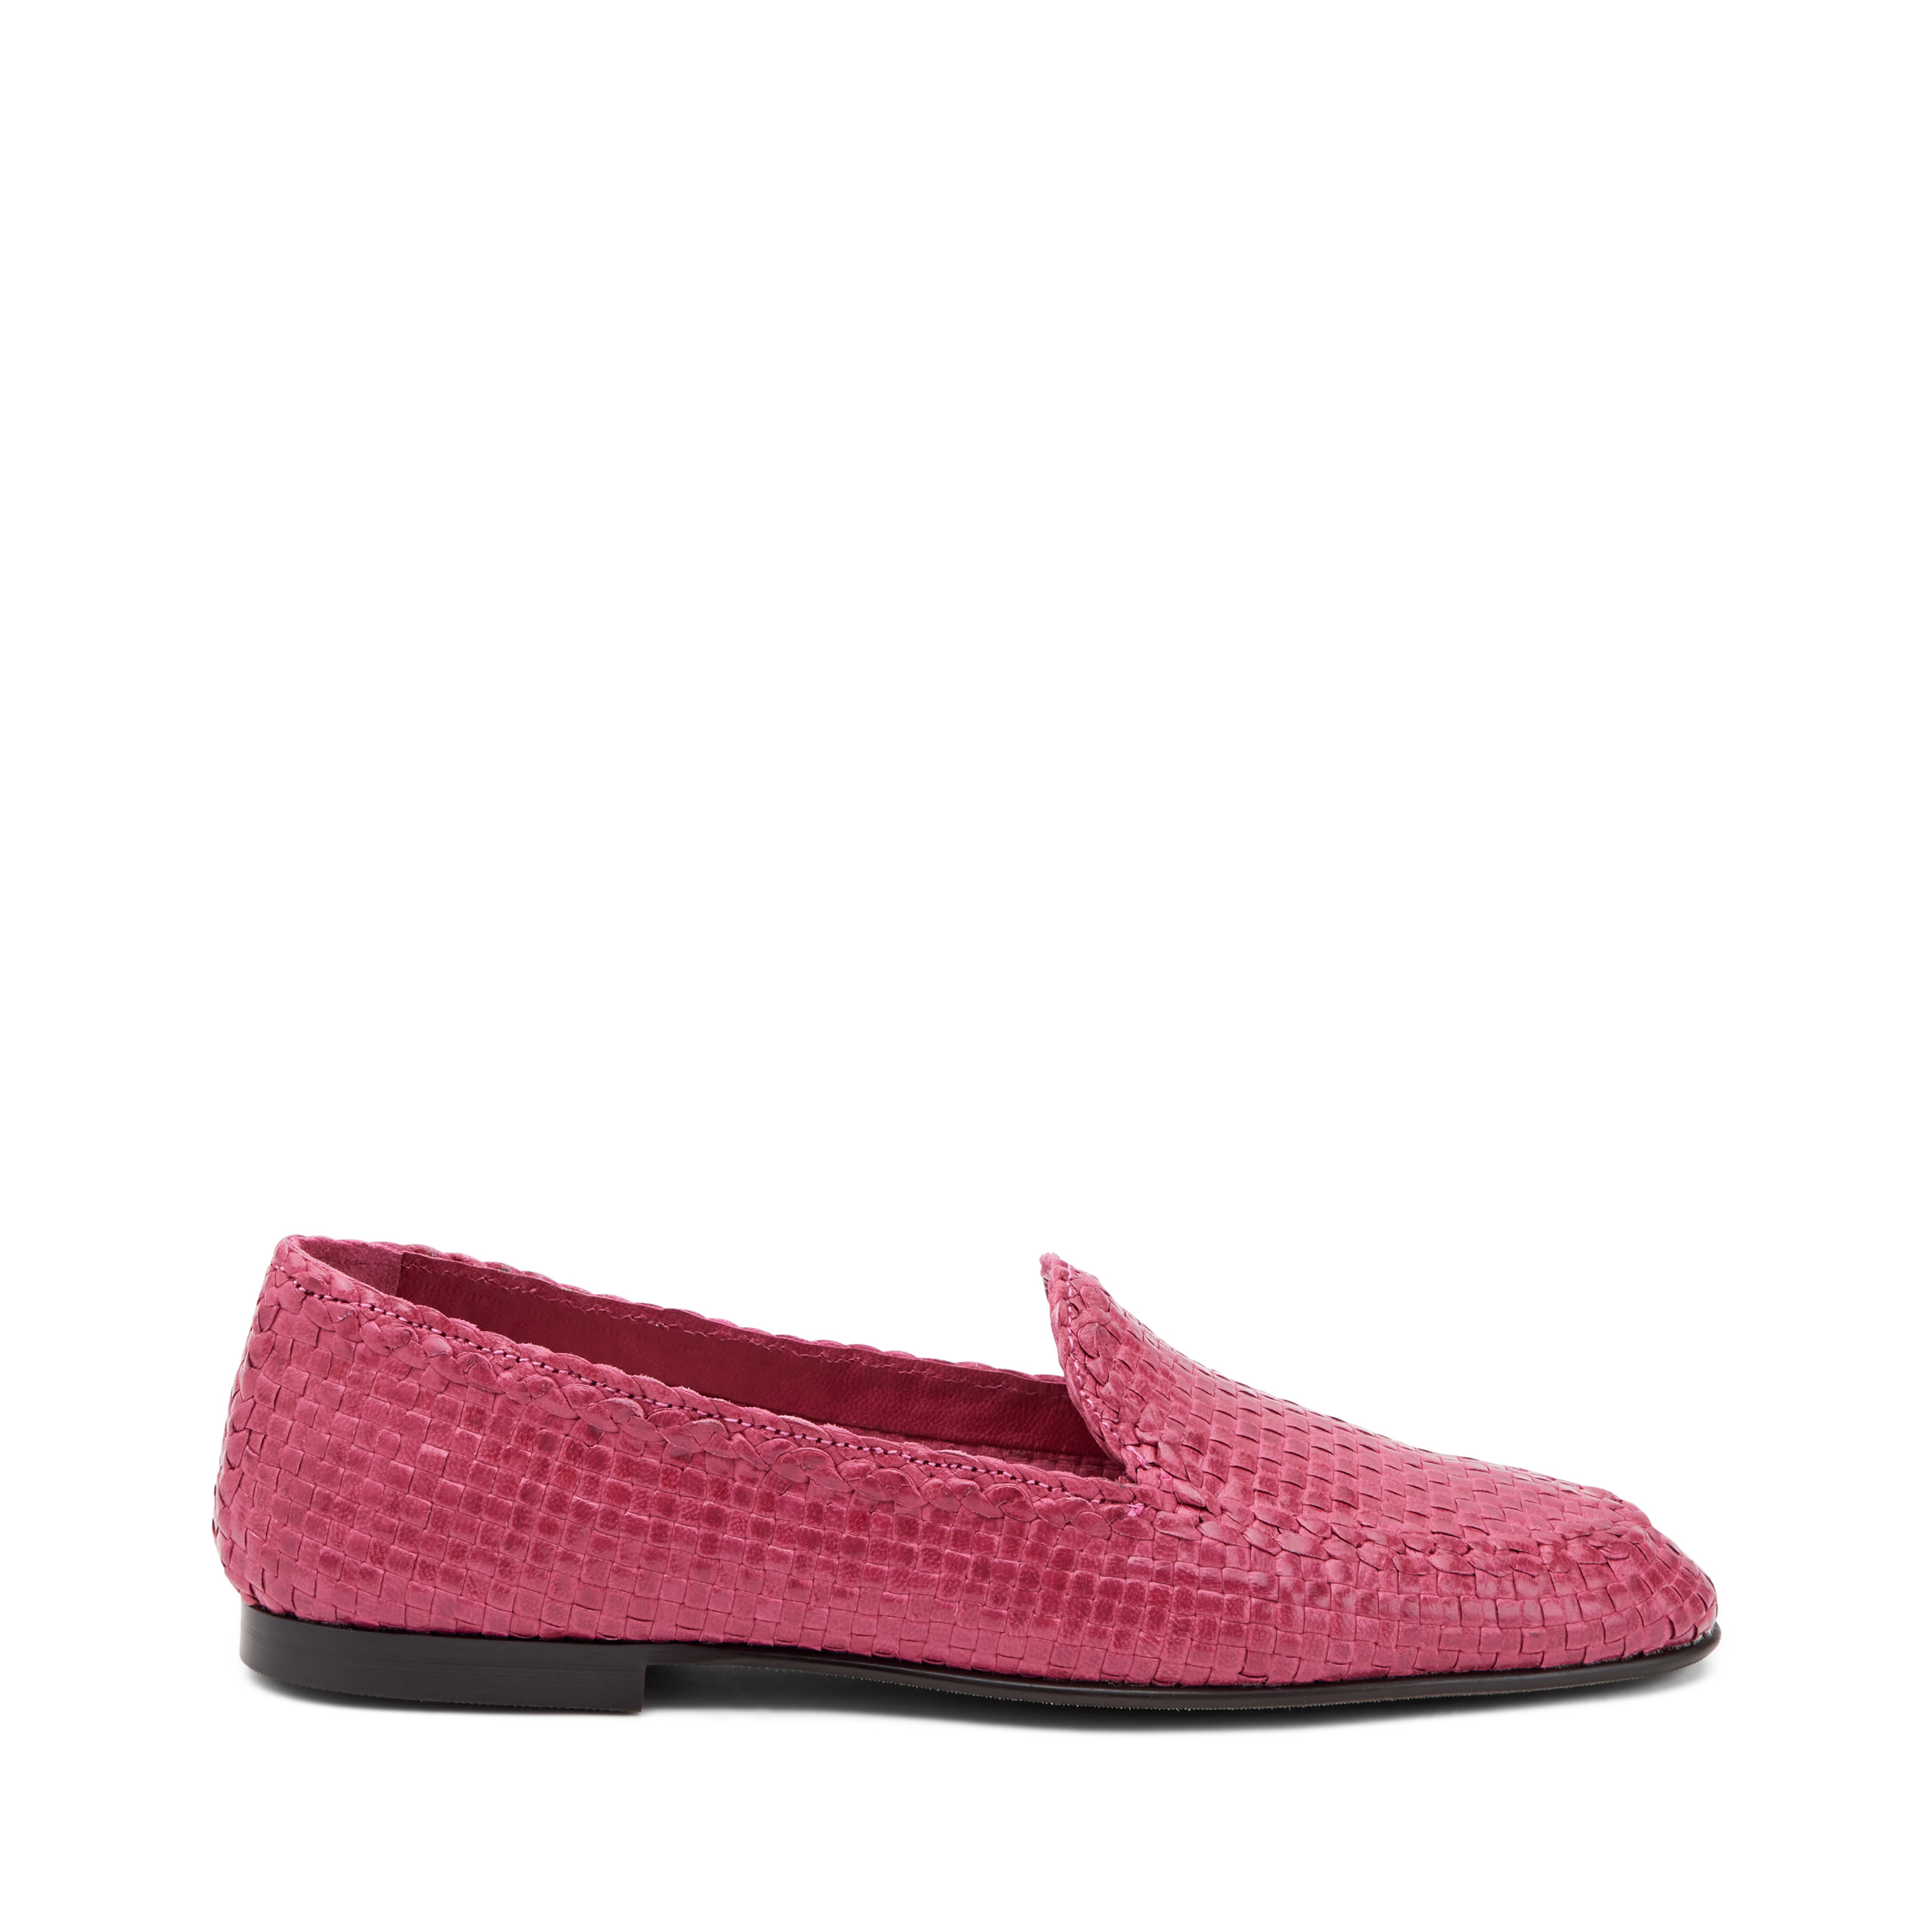 Woven leather loafers, Col. Rosado | Frau